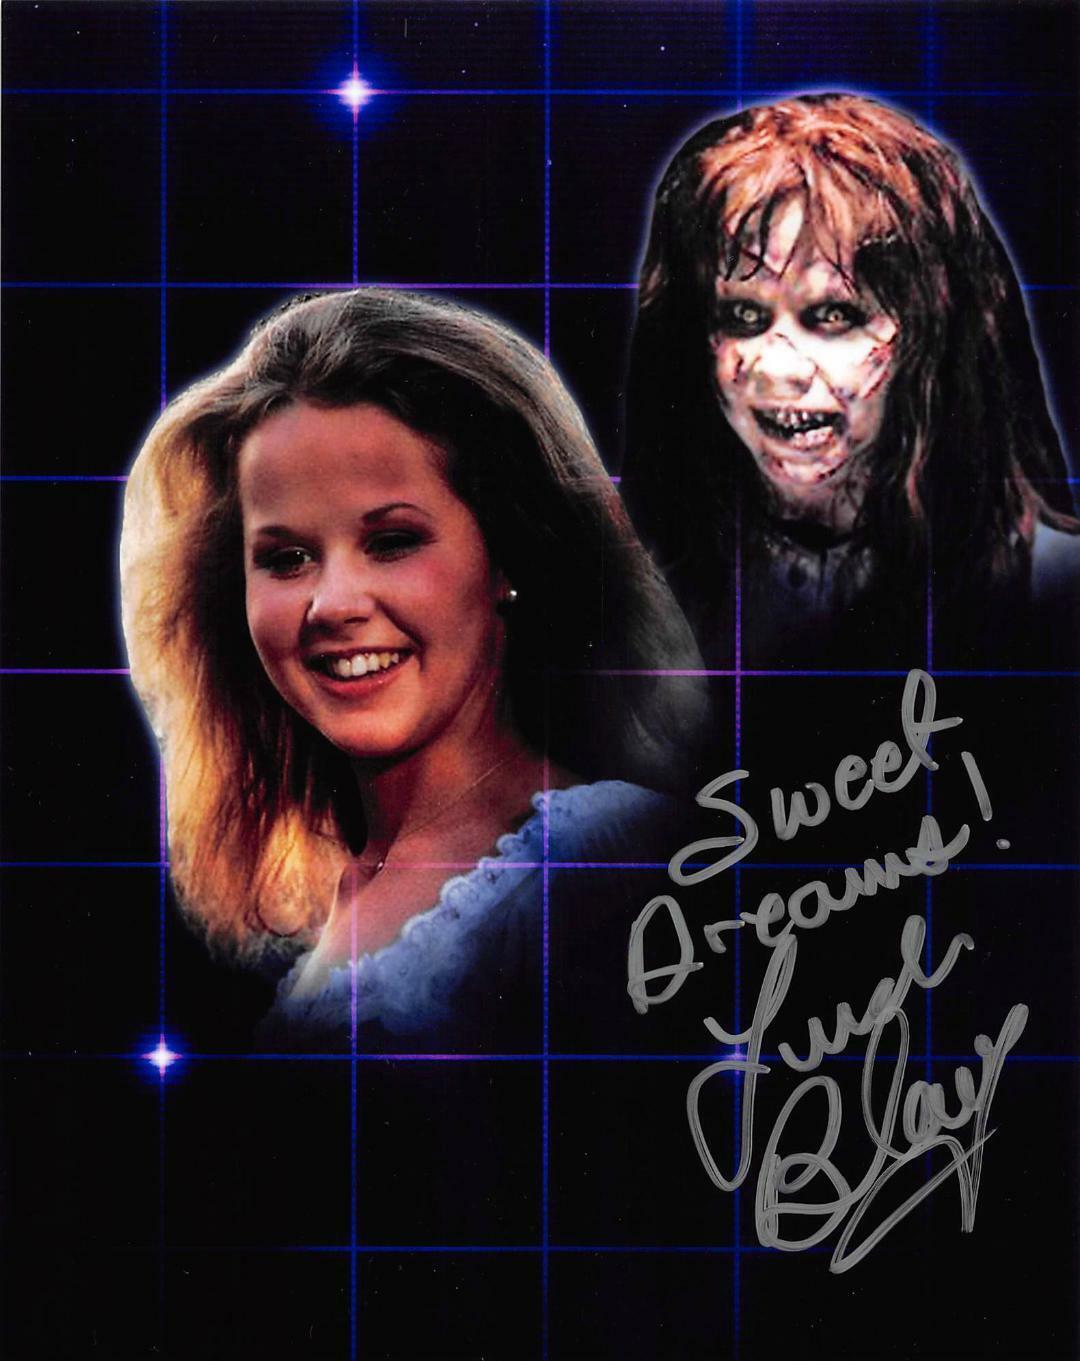 Linda Blair Signed 11x14 Composite Photo Poster painting The Exorcist (Ugly) Sweet Dreams (Cute)